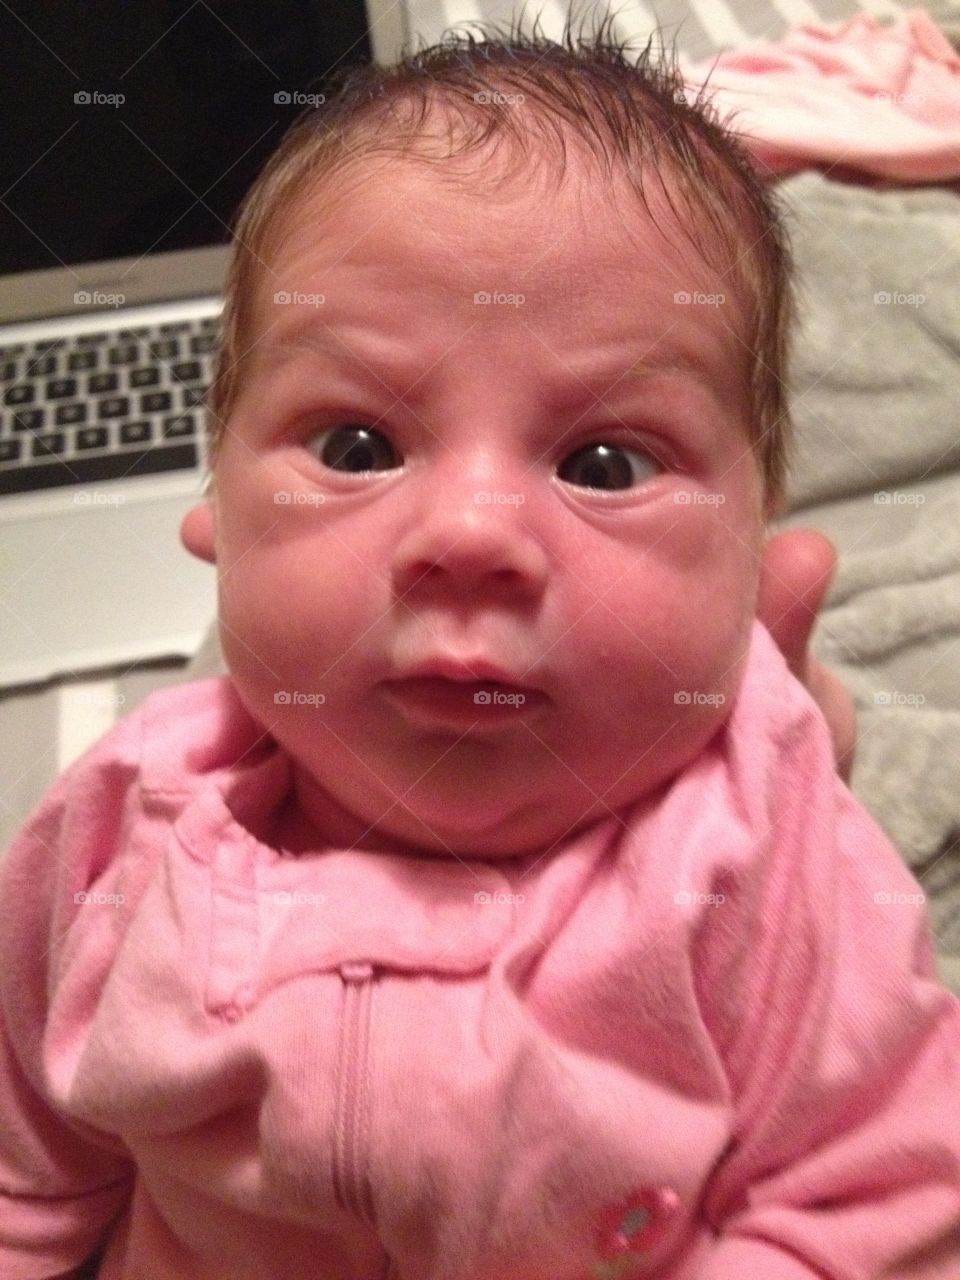 Too cute for words. My newborn daughter has such a personality even only when a couple days old